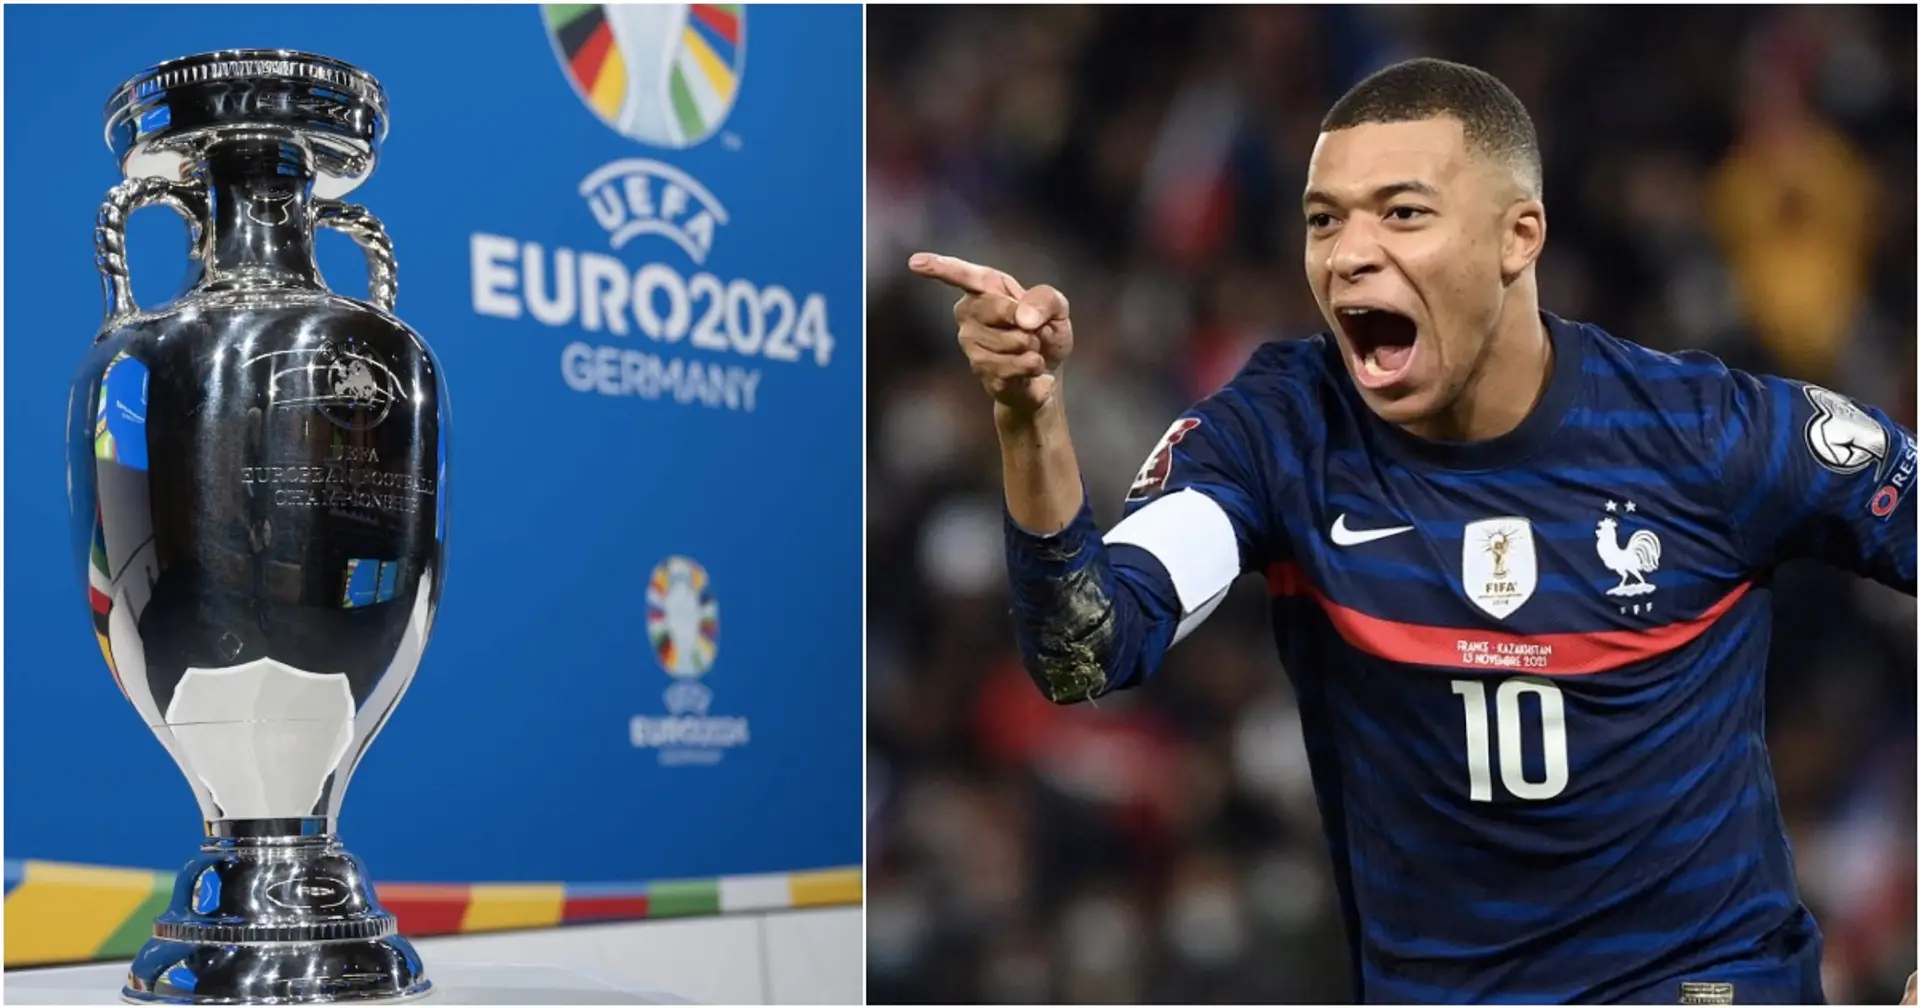 Mbappe tipped as France's potential top scorer at 2024 Euro but runner-up has more goals than Kylian